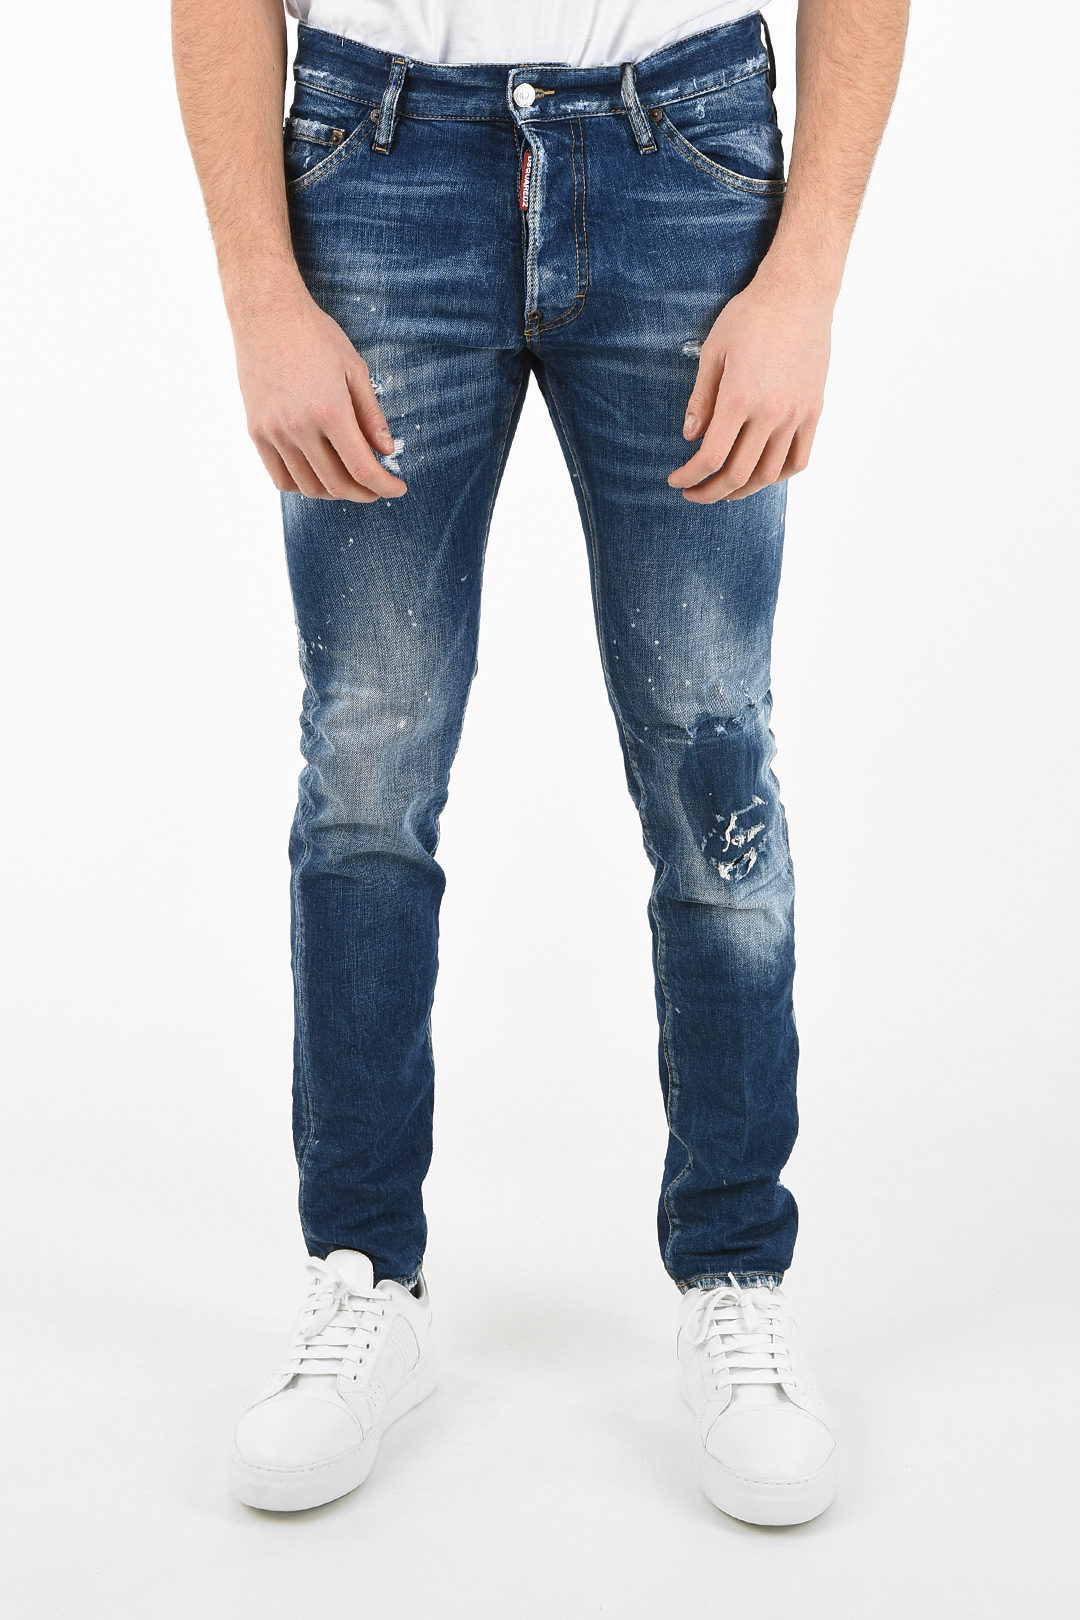 16cm Distressed COOL GUY Jeans